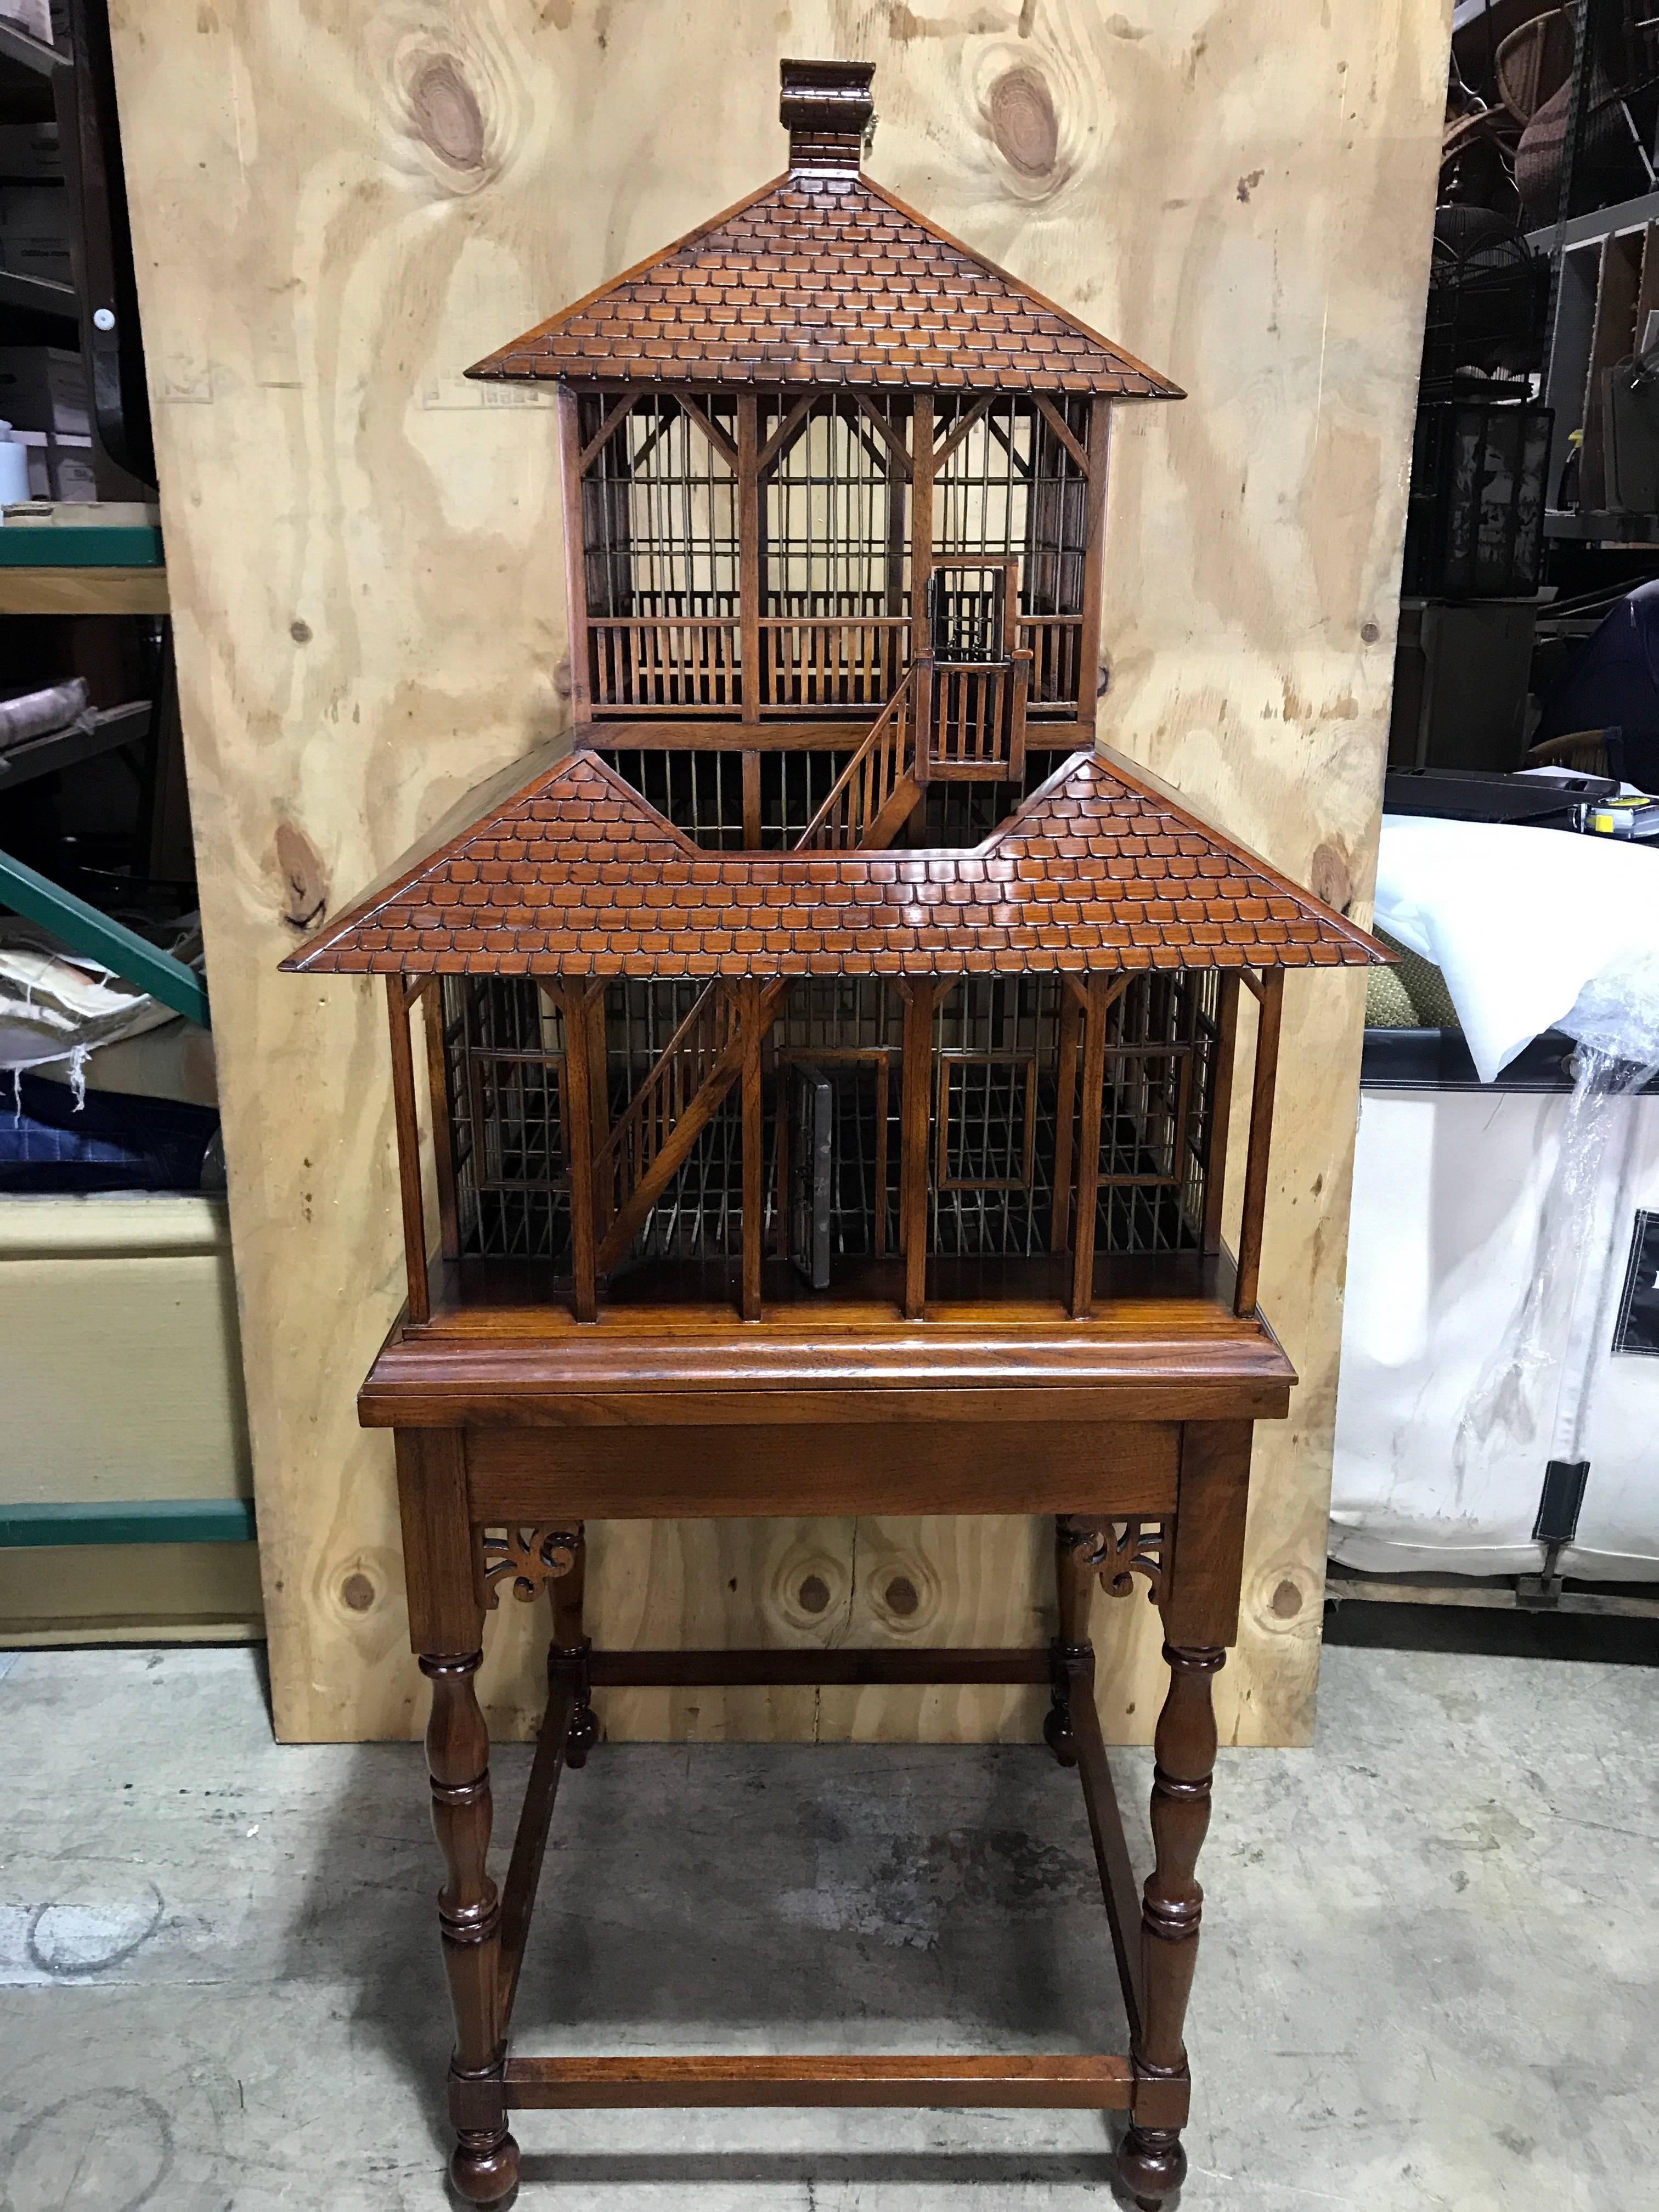 Carved mahogany grand antebellum style bird house on stand. Of carved mahogany and metal doors and windows. The quality and attention to detail is impressive of this architectural model- bird house. Complete with a removable Chimneyed 2nd story